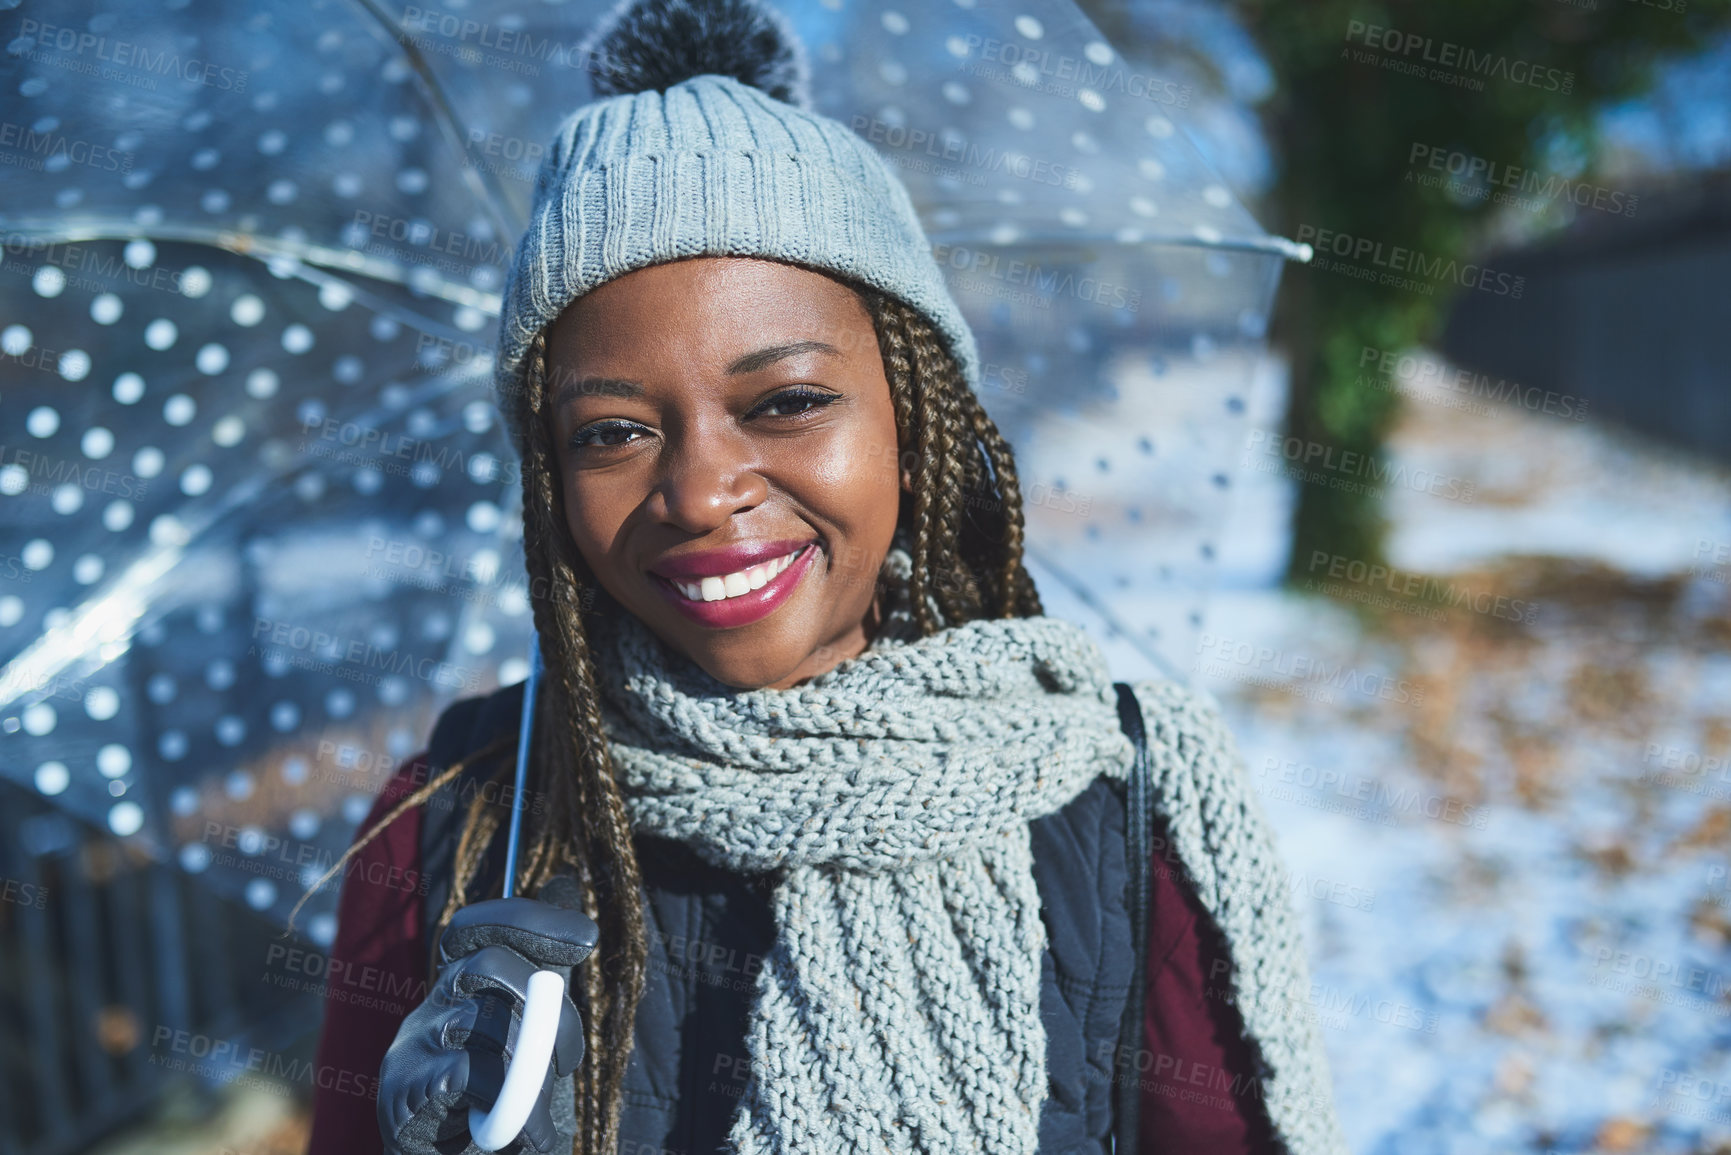 Buy stock photo Shot of a beautiful young woman holding an umbrella on a wintery day outdoors